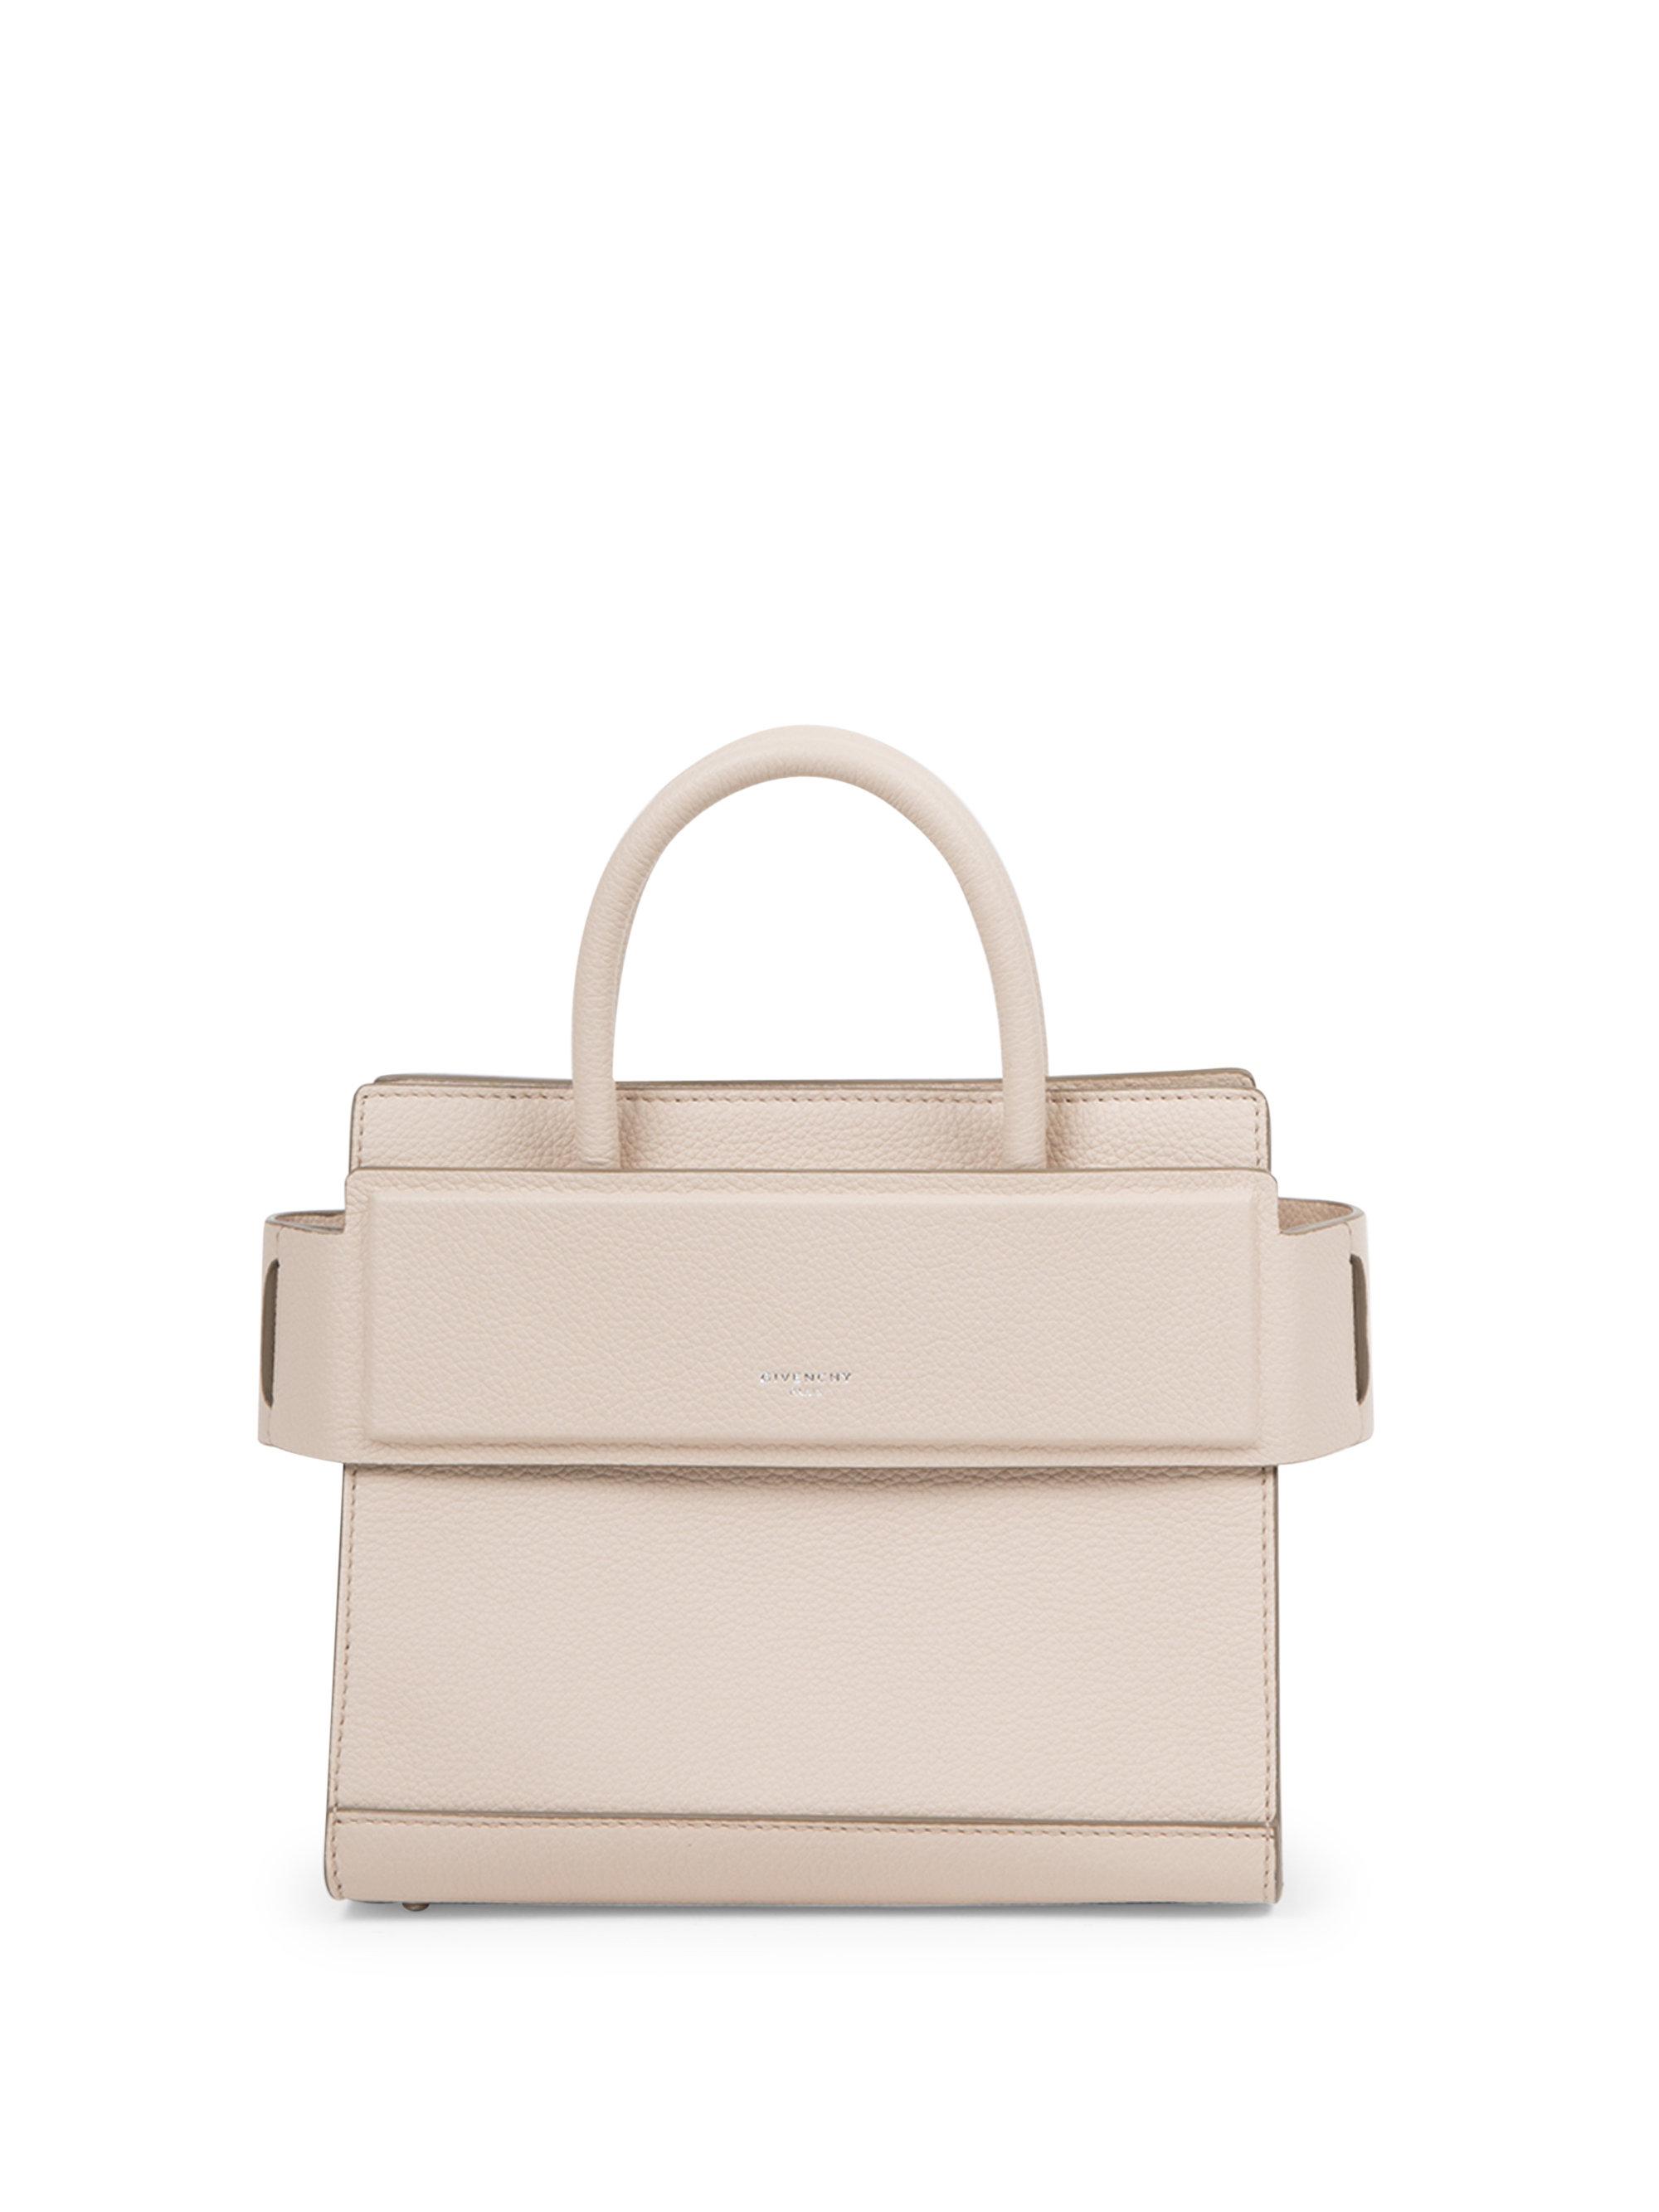 Givenchy Horizon Mini Leather Shoulder Bag in Natural | Lyst